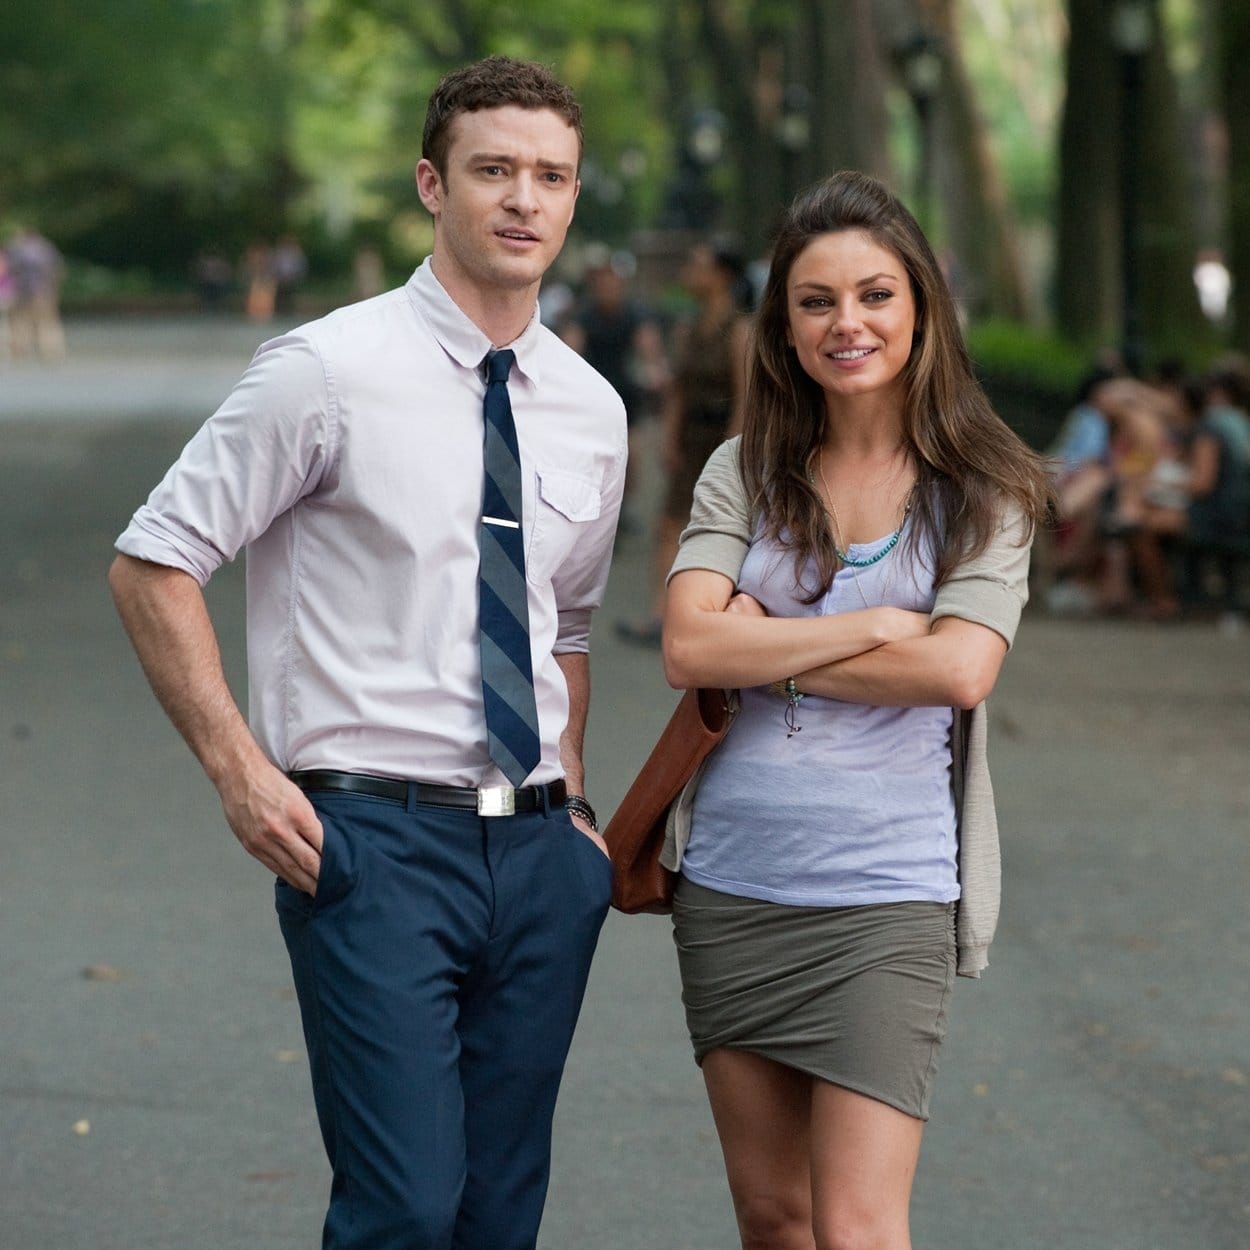 Justin Timberlake as Dylan and Mila Kunis as Jamie in the 2011 American romantic comedy film Friends with Benefits